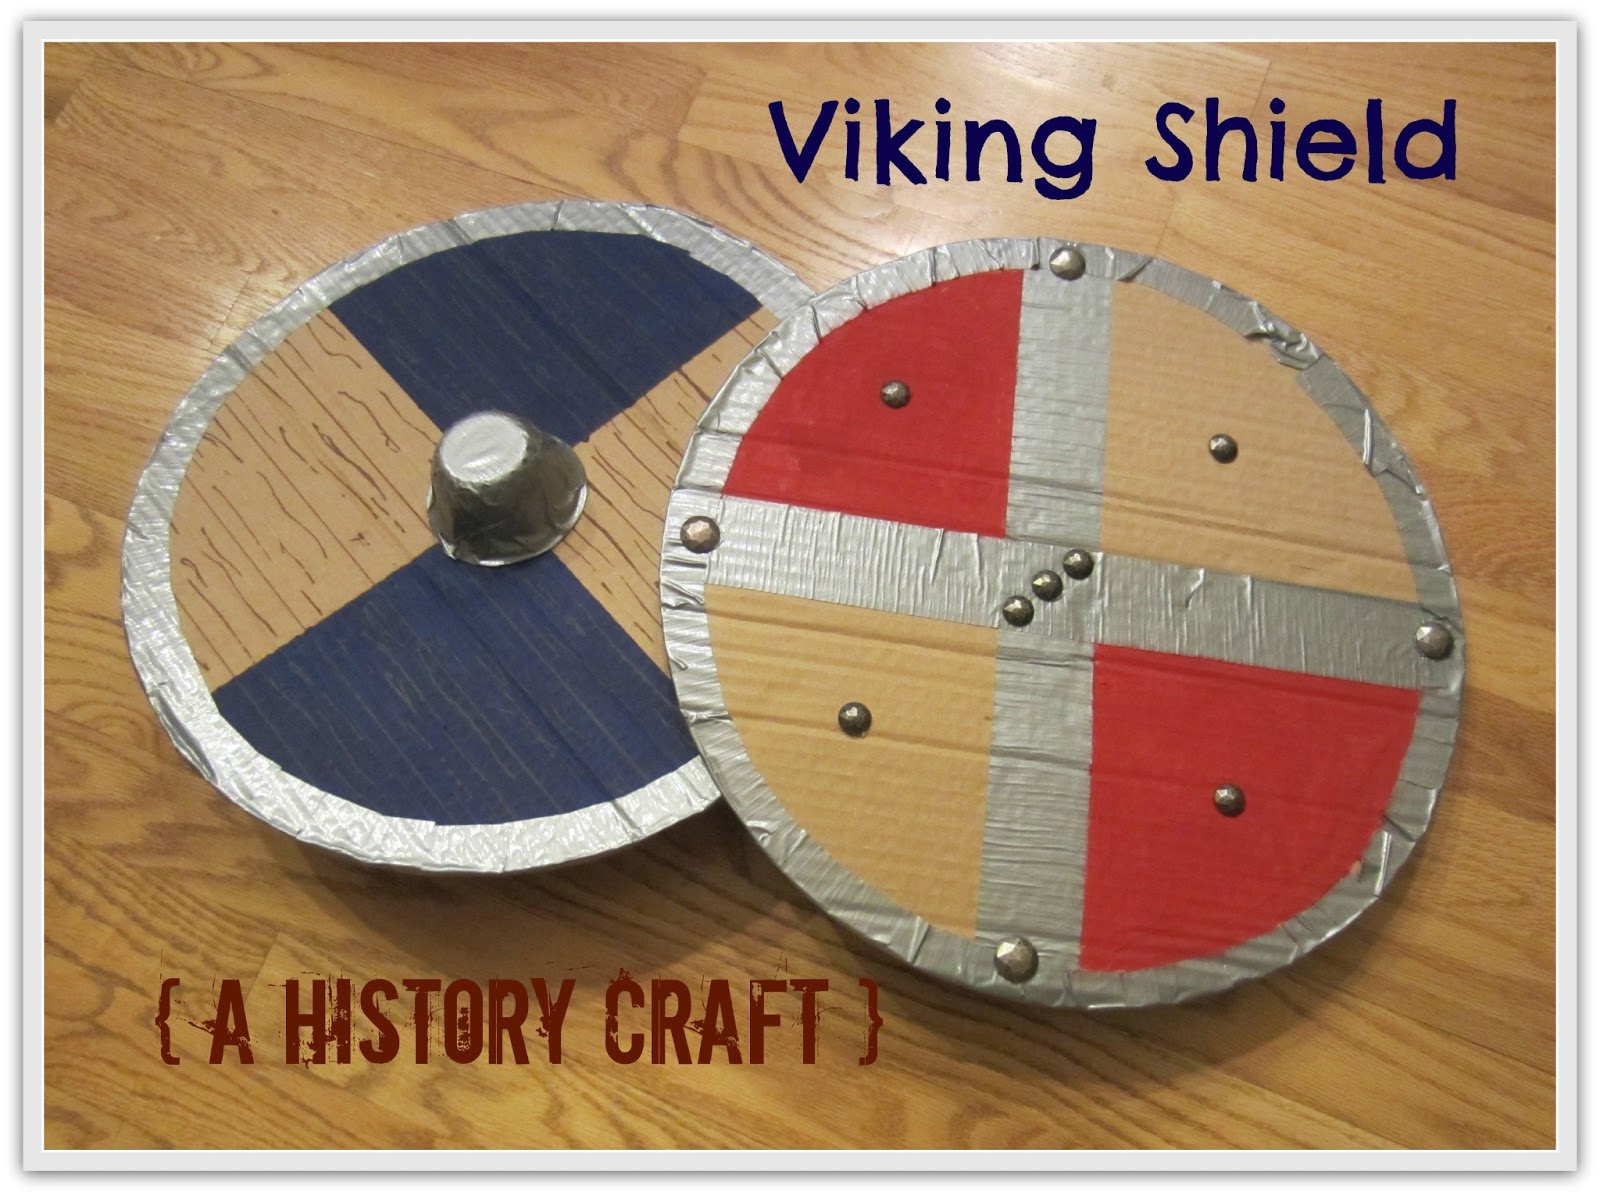 Relentlessly Fun, Deceptively Educational: Viking Shield upcycled history craft